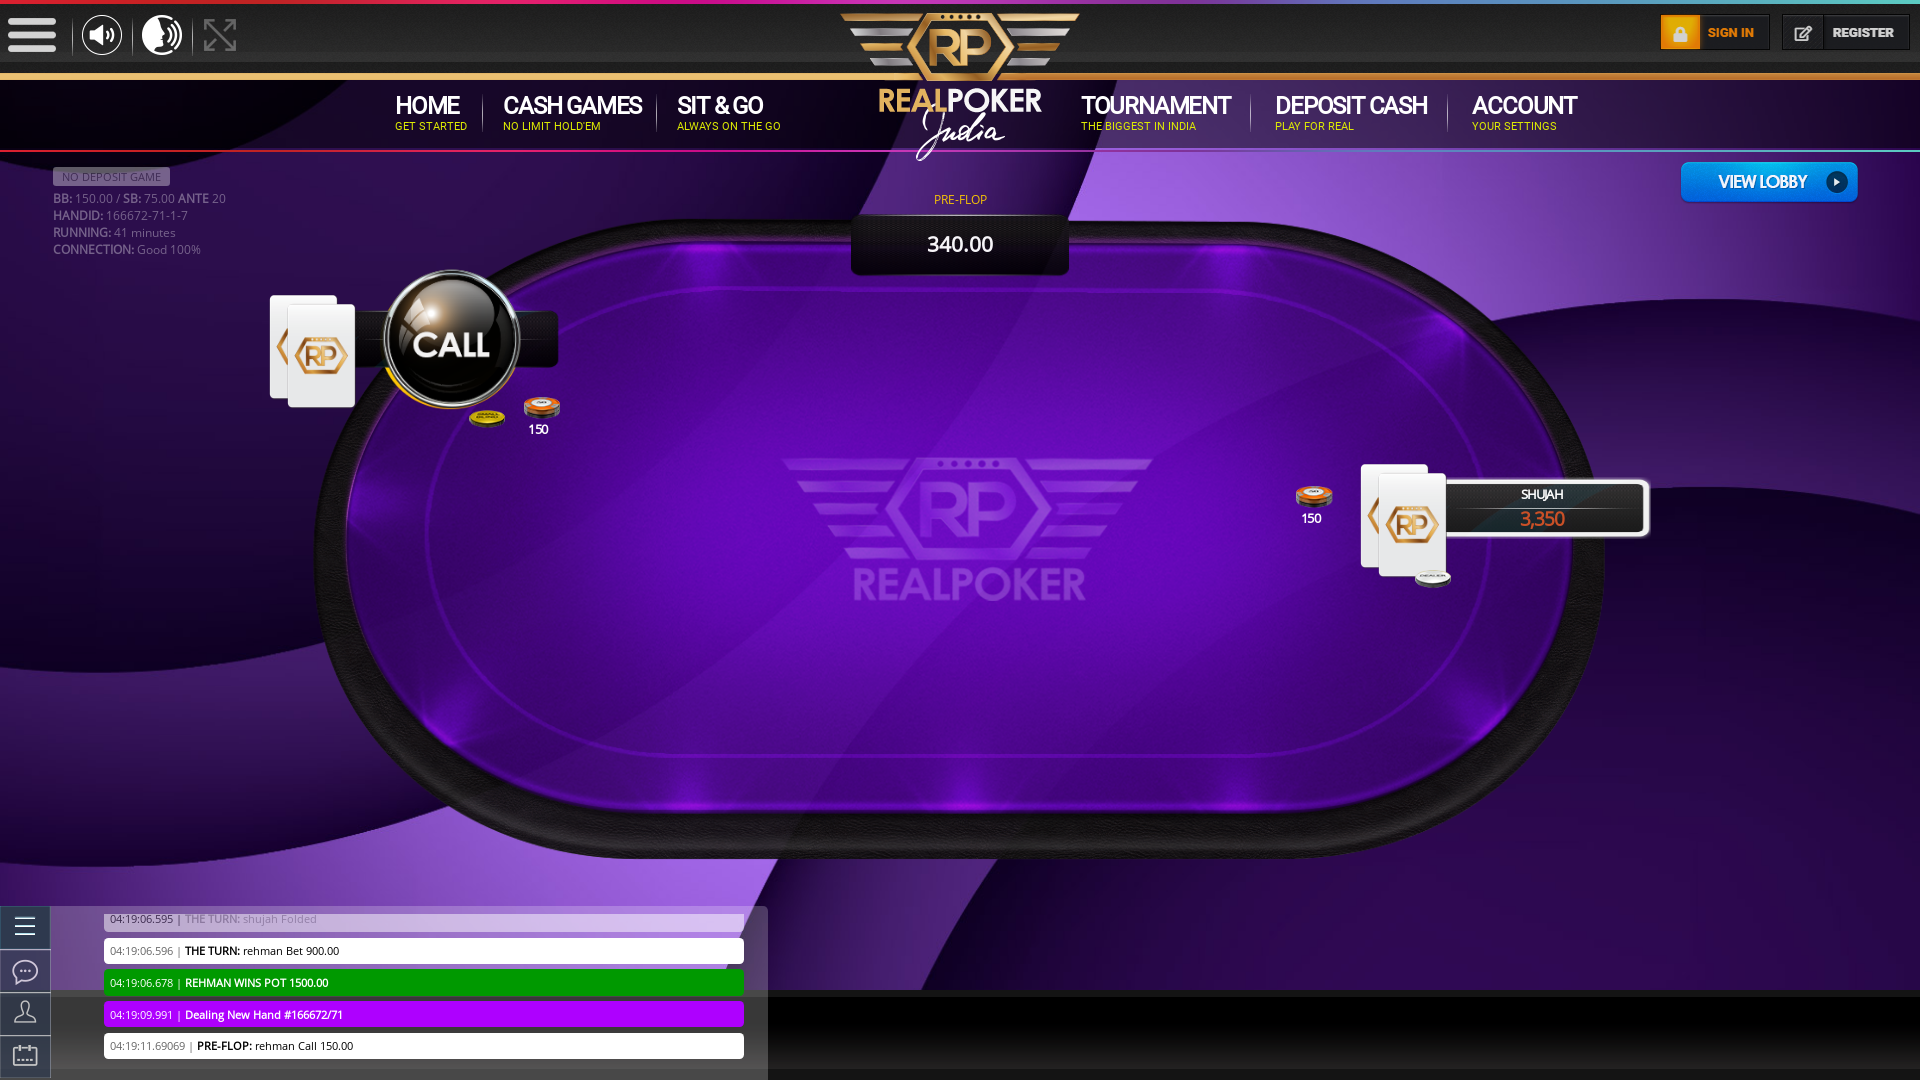 Indian online poker on a 10 player table in the 41st minute match up